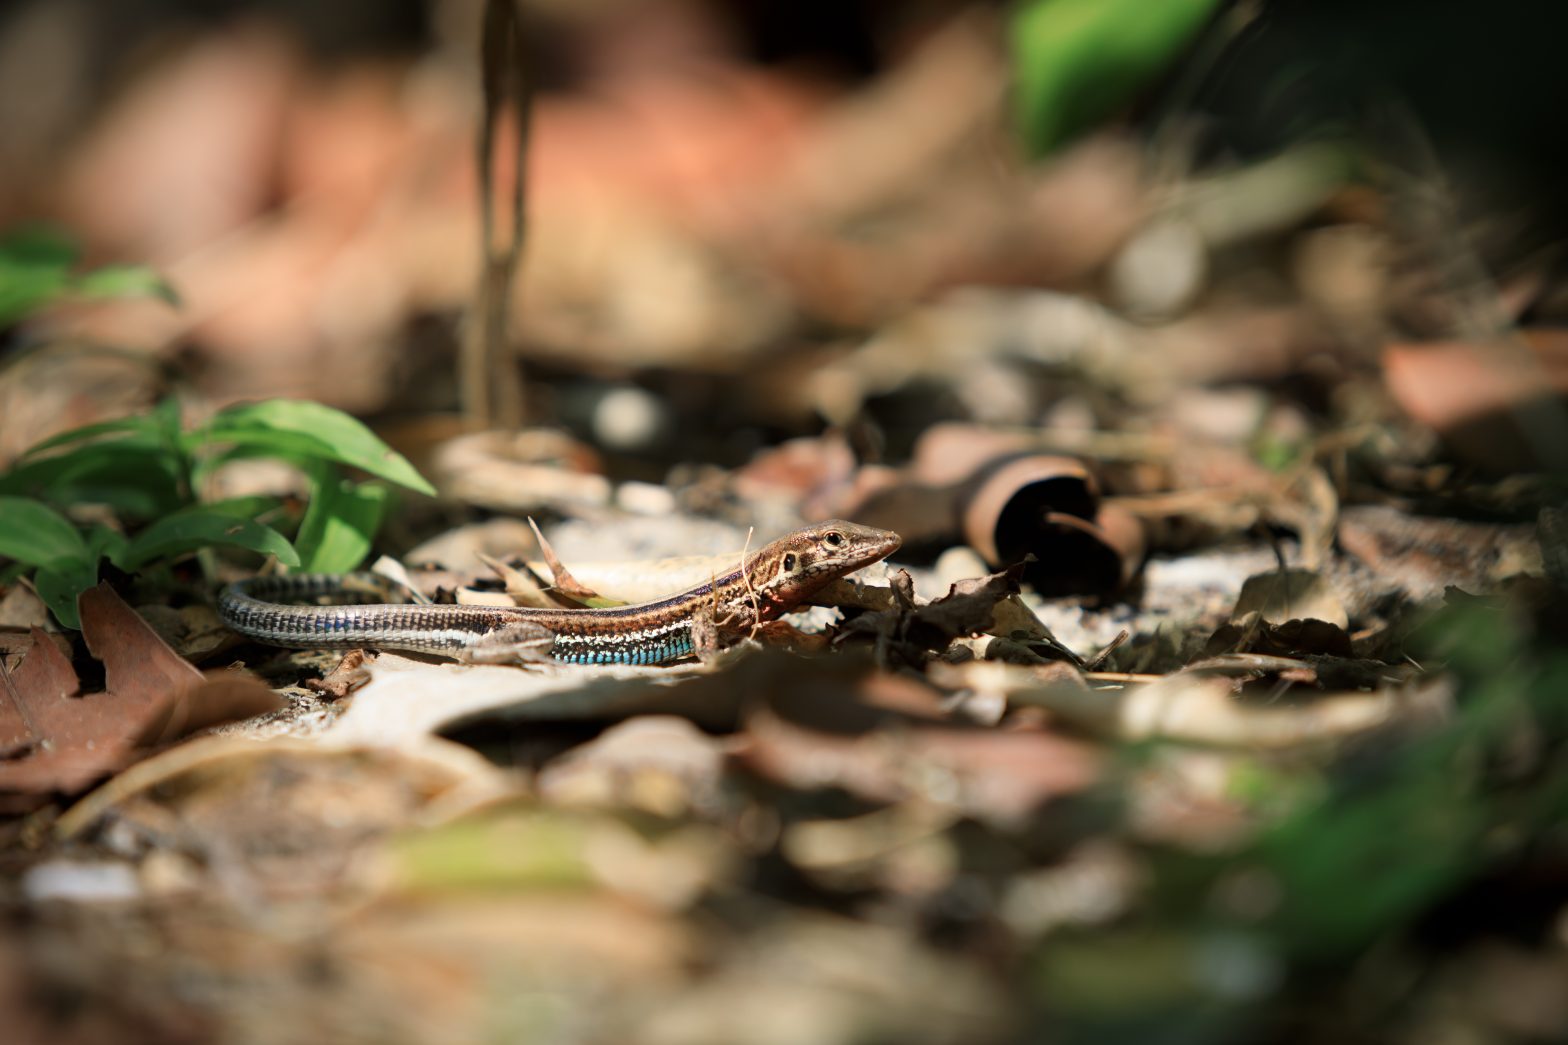 striped lizard standing on leaves